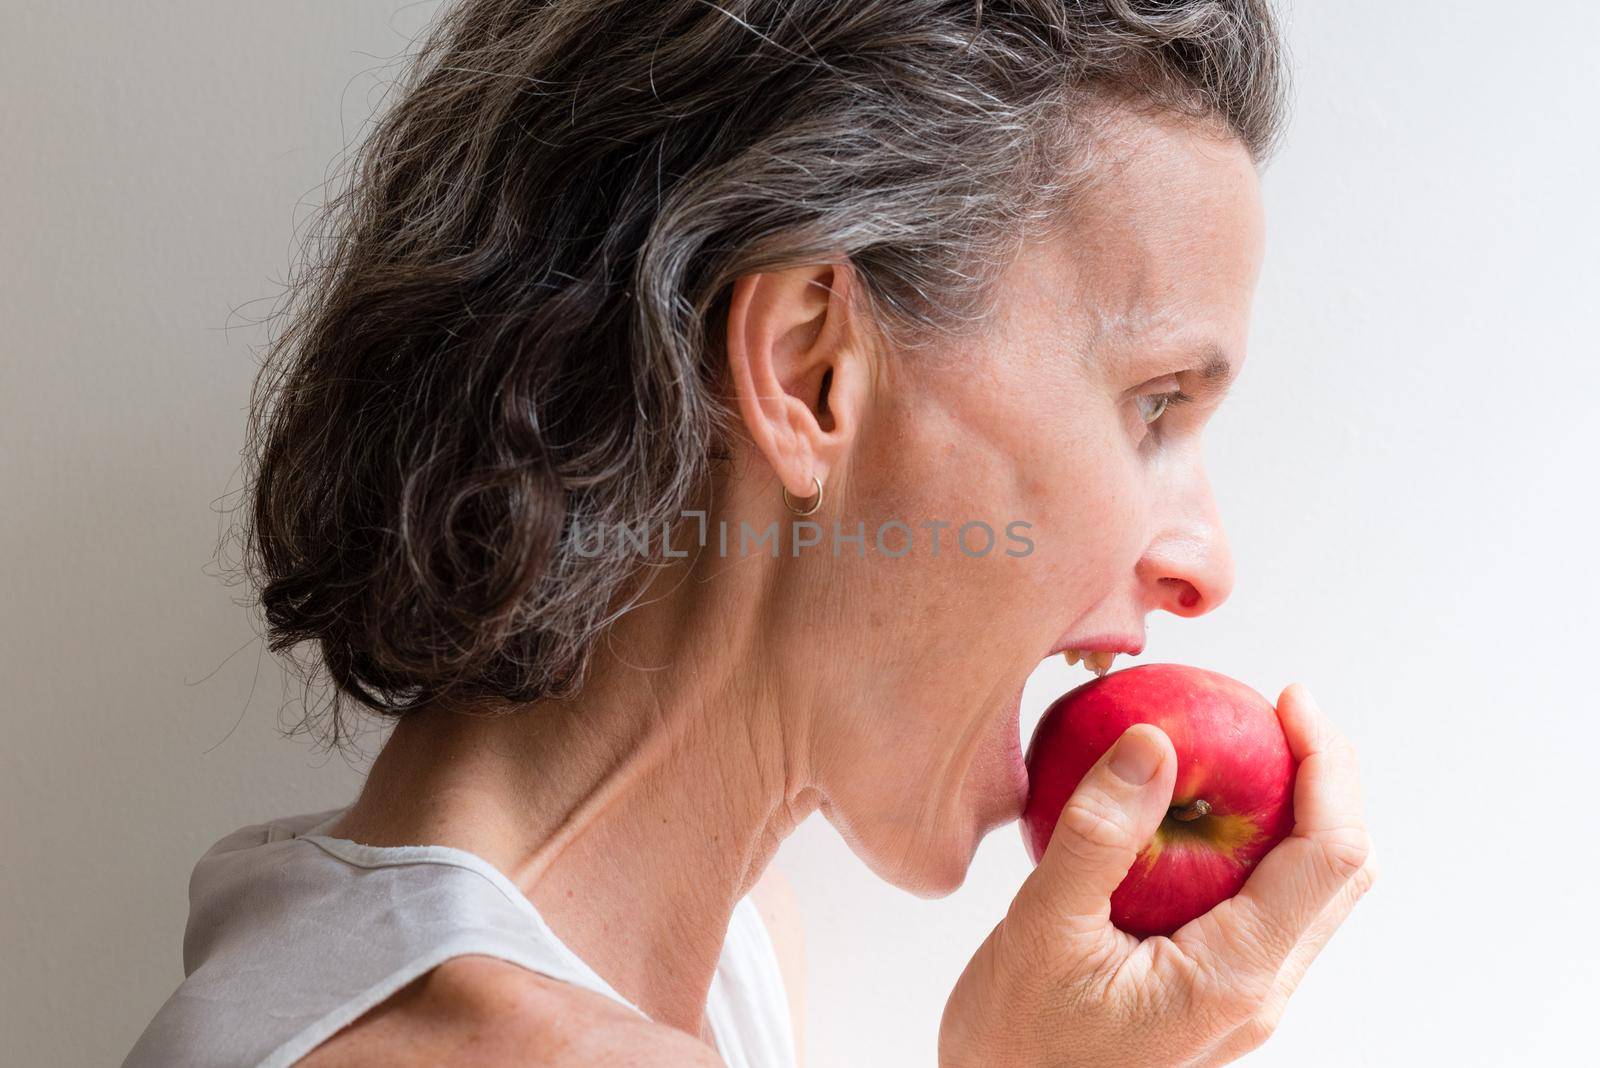 Profile of middle aged woman with grey hair biting into red apple (selective focus)